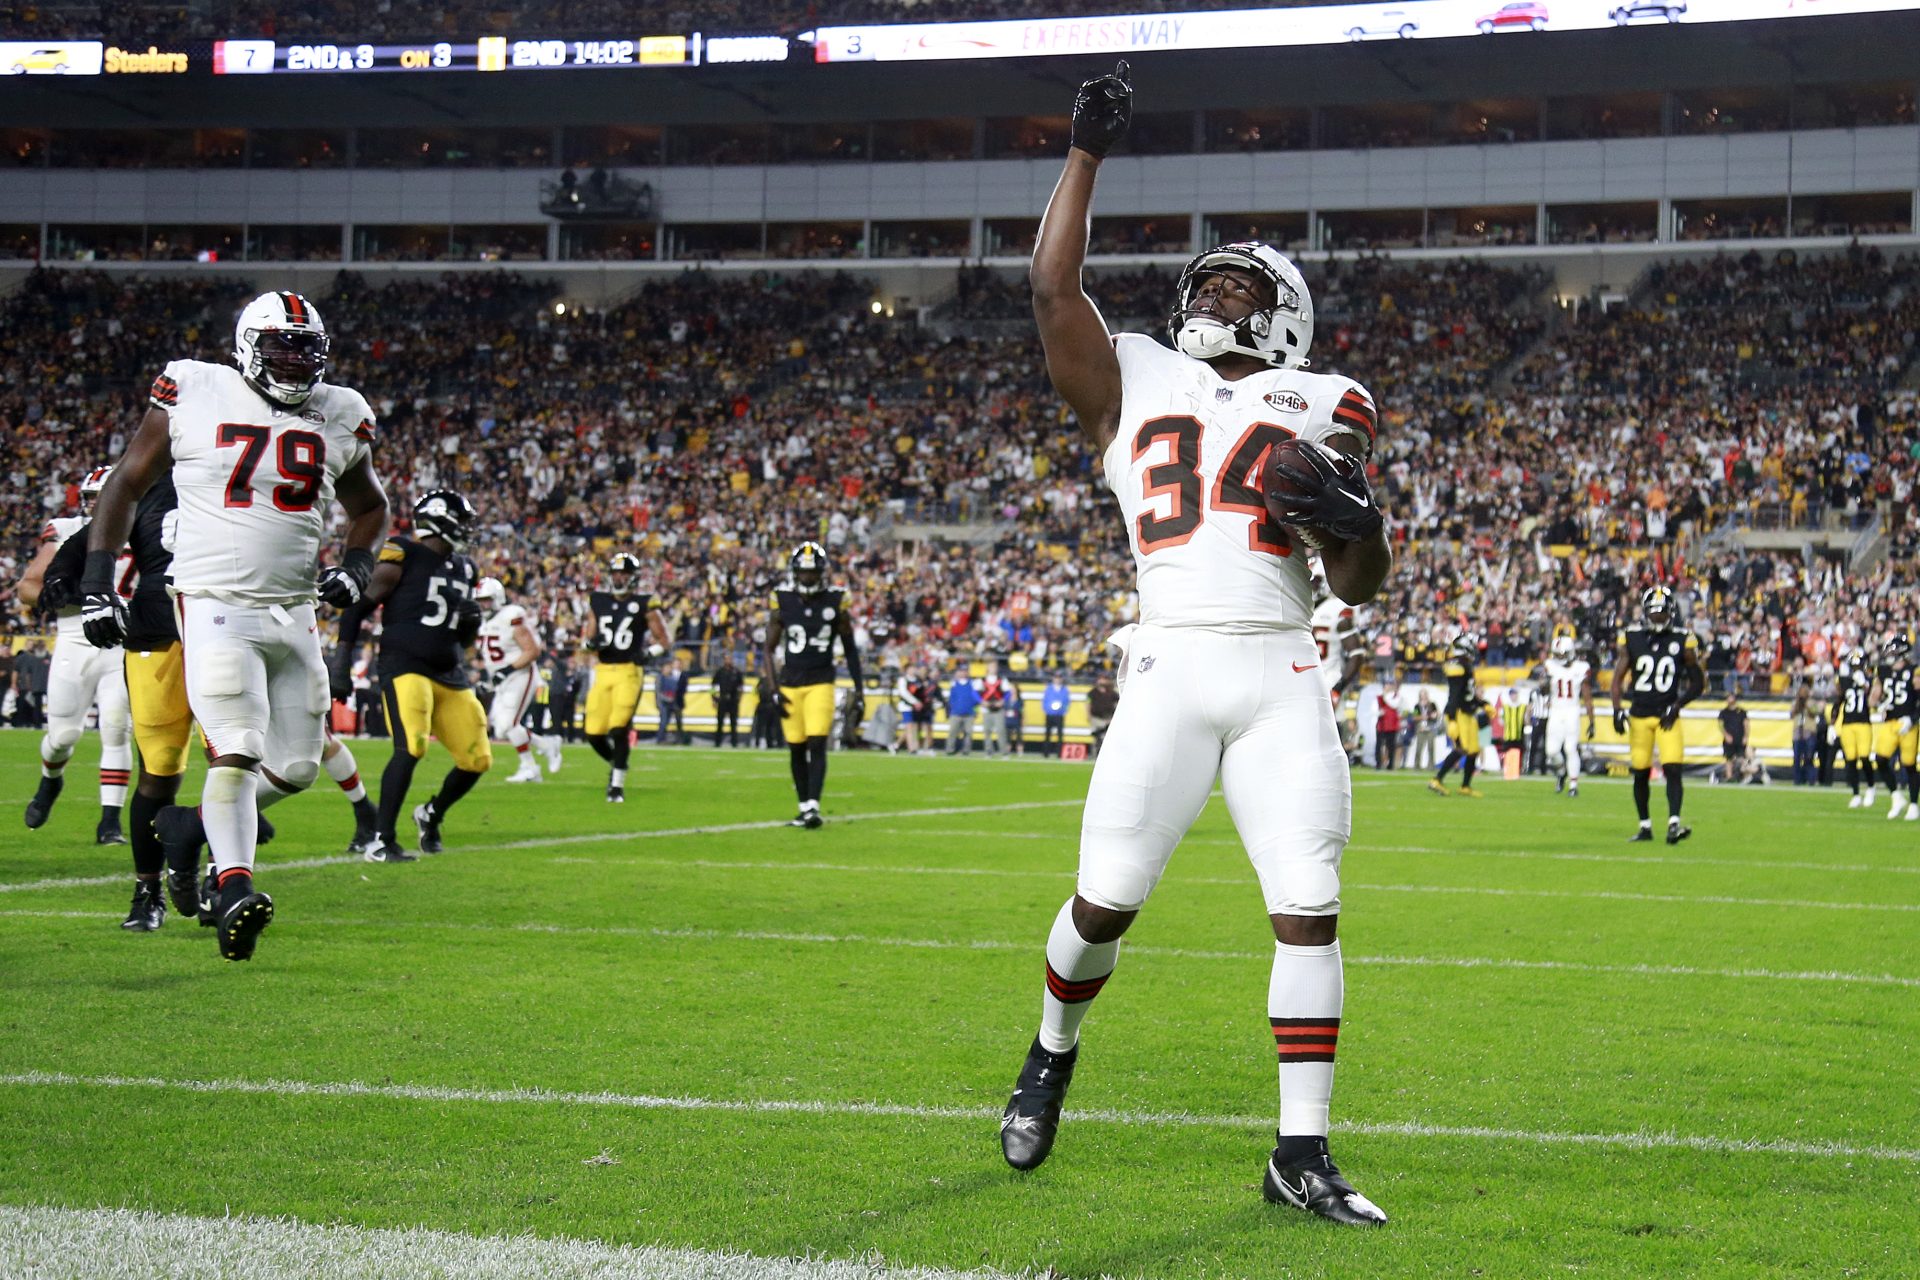 Browns at Colts: RB Jerome Ford